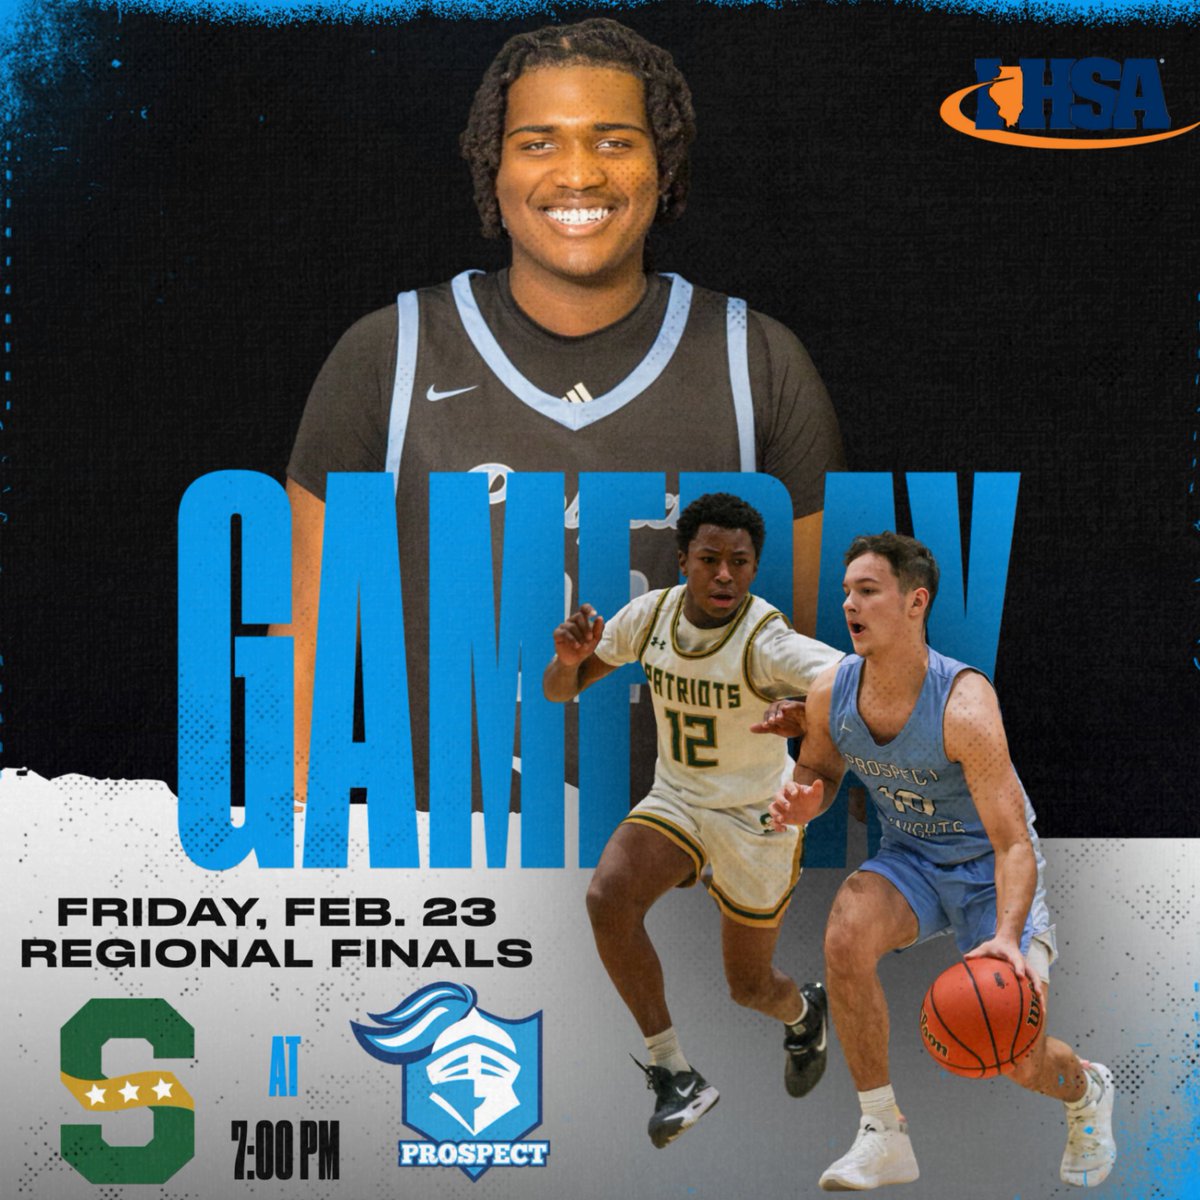 Regional Final tonight at Jean Walker! Tip is set for 7 pm. First 200 U fans get shirts! @_knightmedia on the call: vimeo.com/event/4111304 Tickets: gofan.co/event/1423828?… @KnightsofPHS @ScottMcD_PHS @PHS_A_Boosters